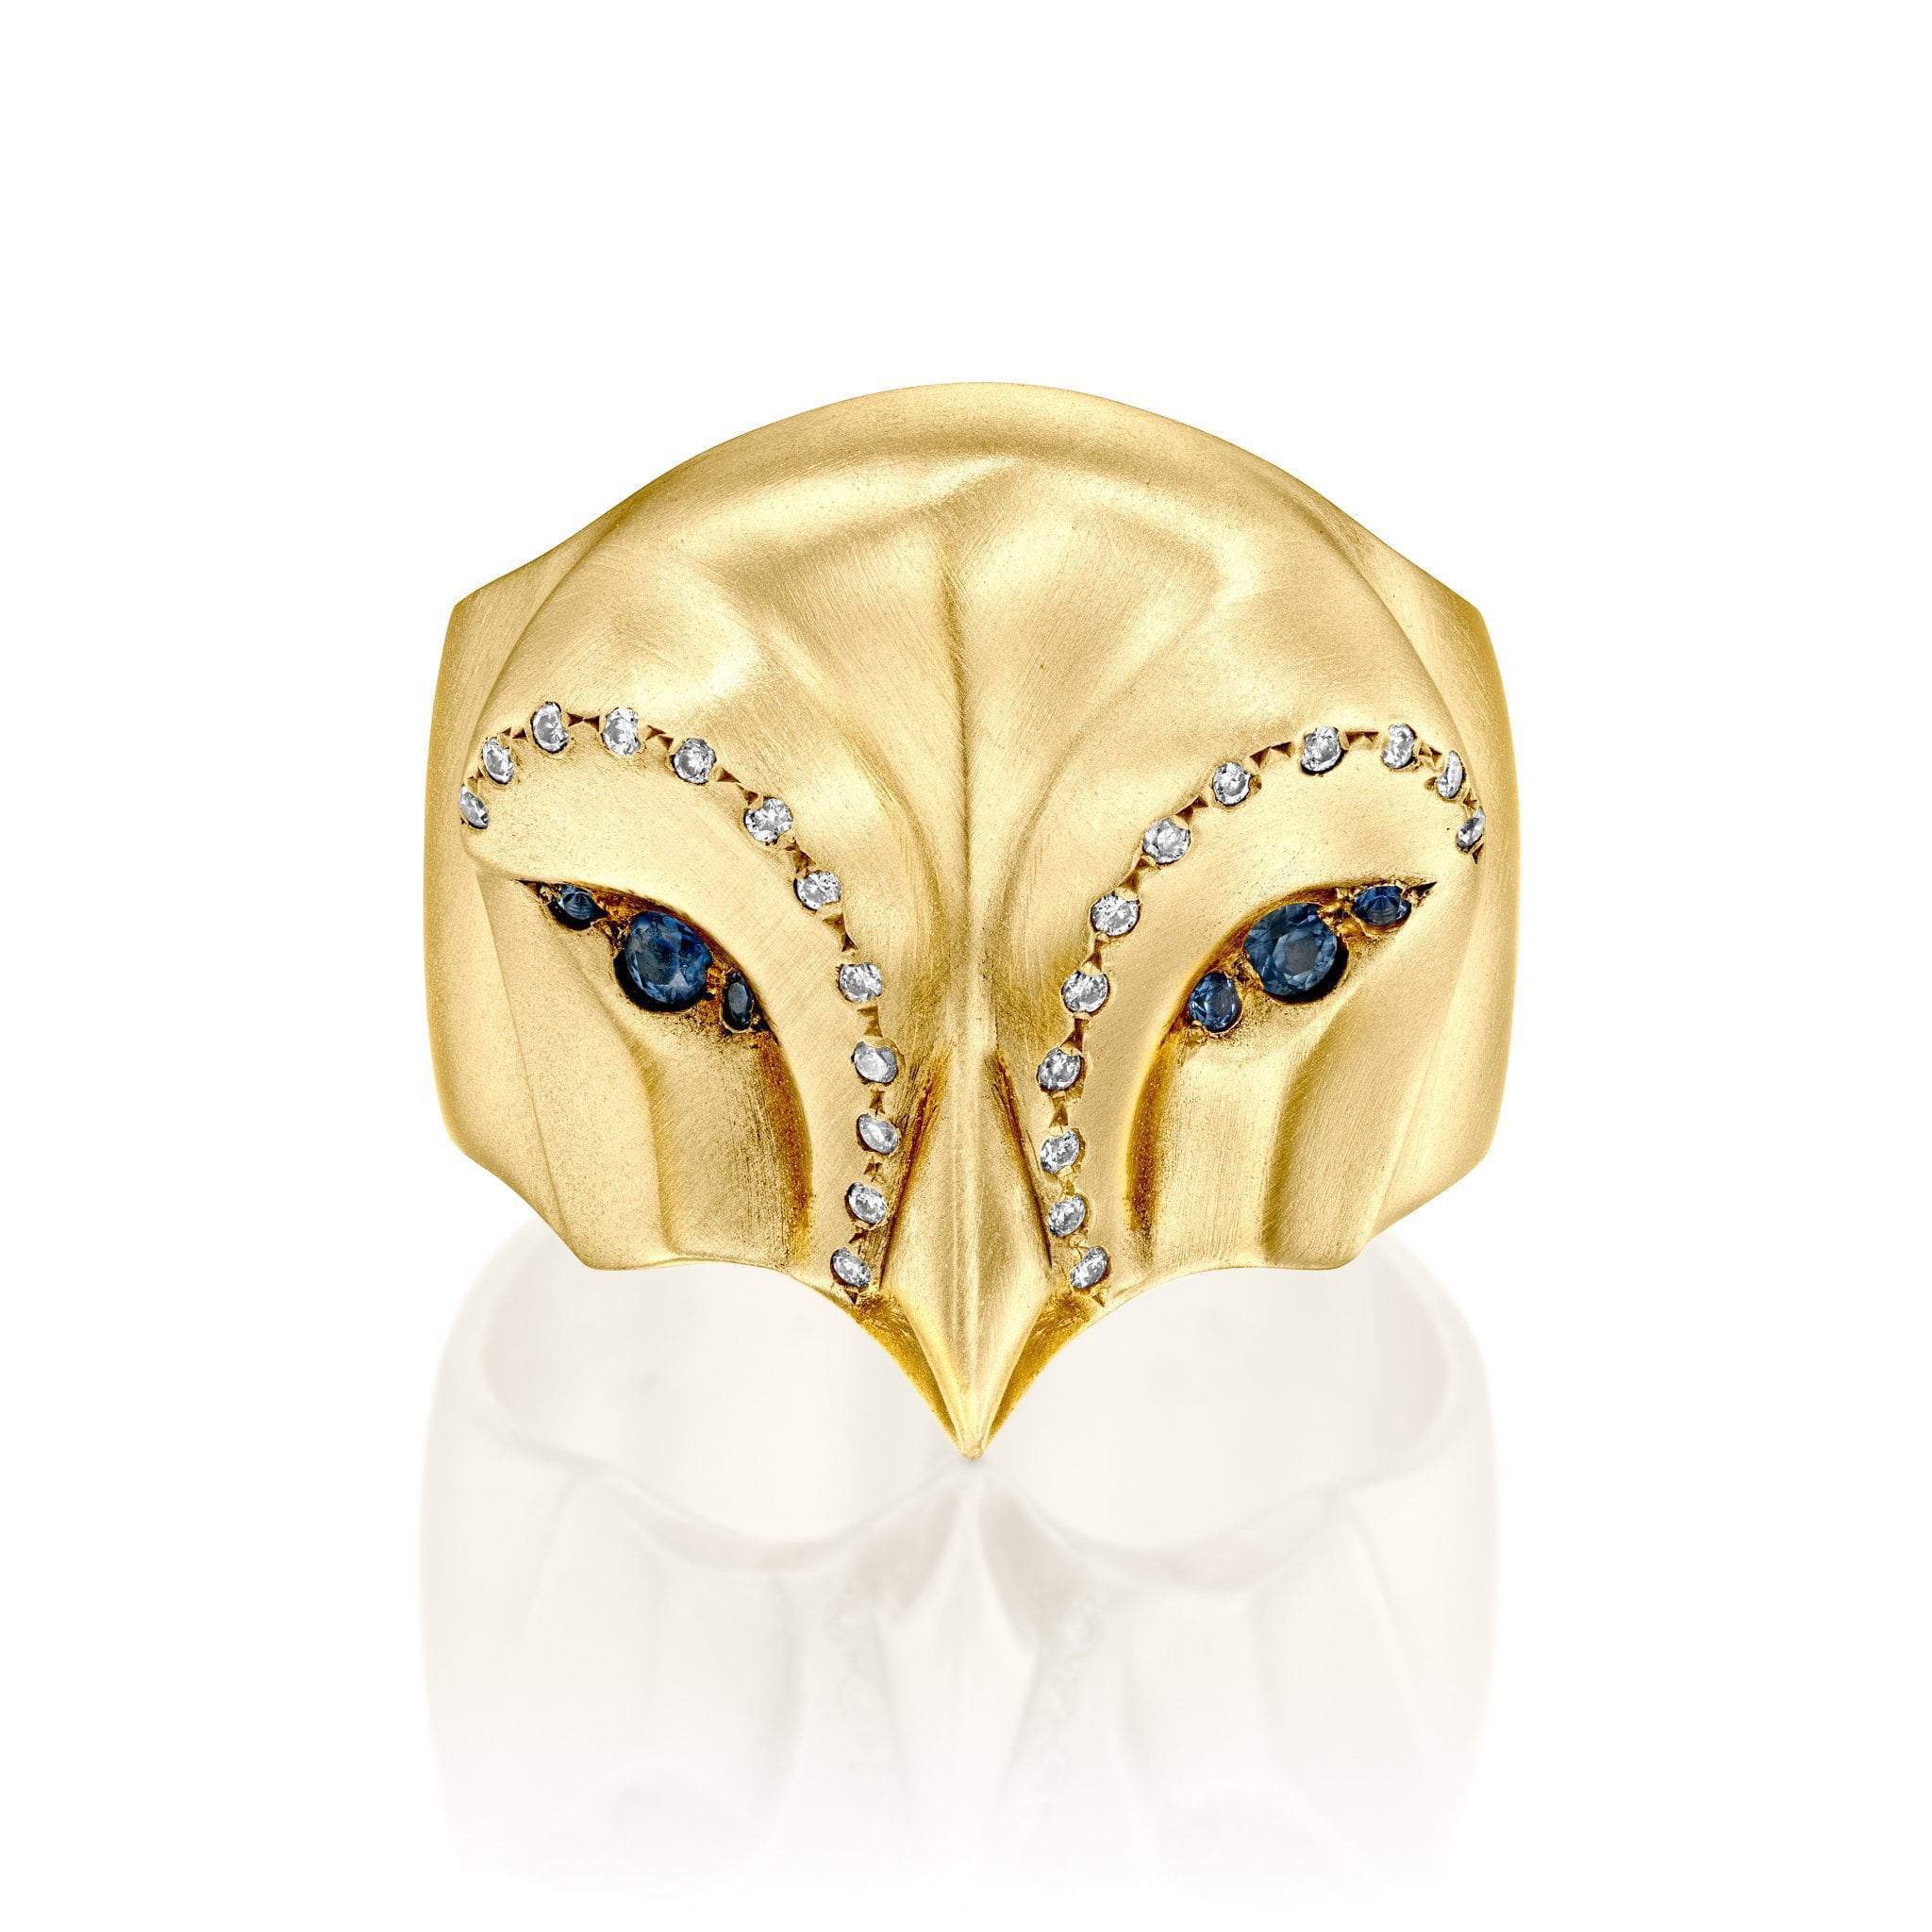 ELINA GLEIZER Select Your Size / Yellow Gold Rose Gold Snowy Owl Ring with Blue Sapphires and White Diamonds